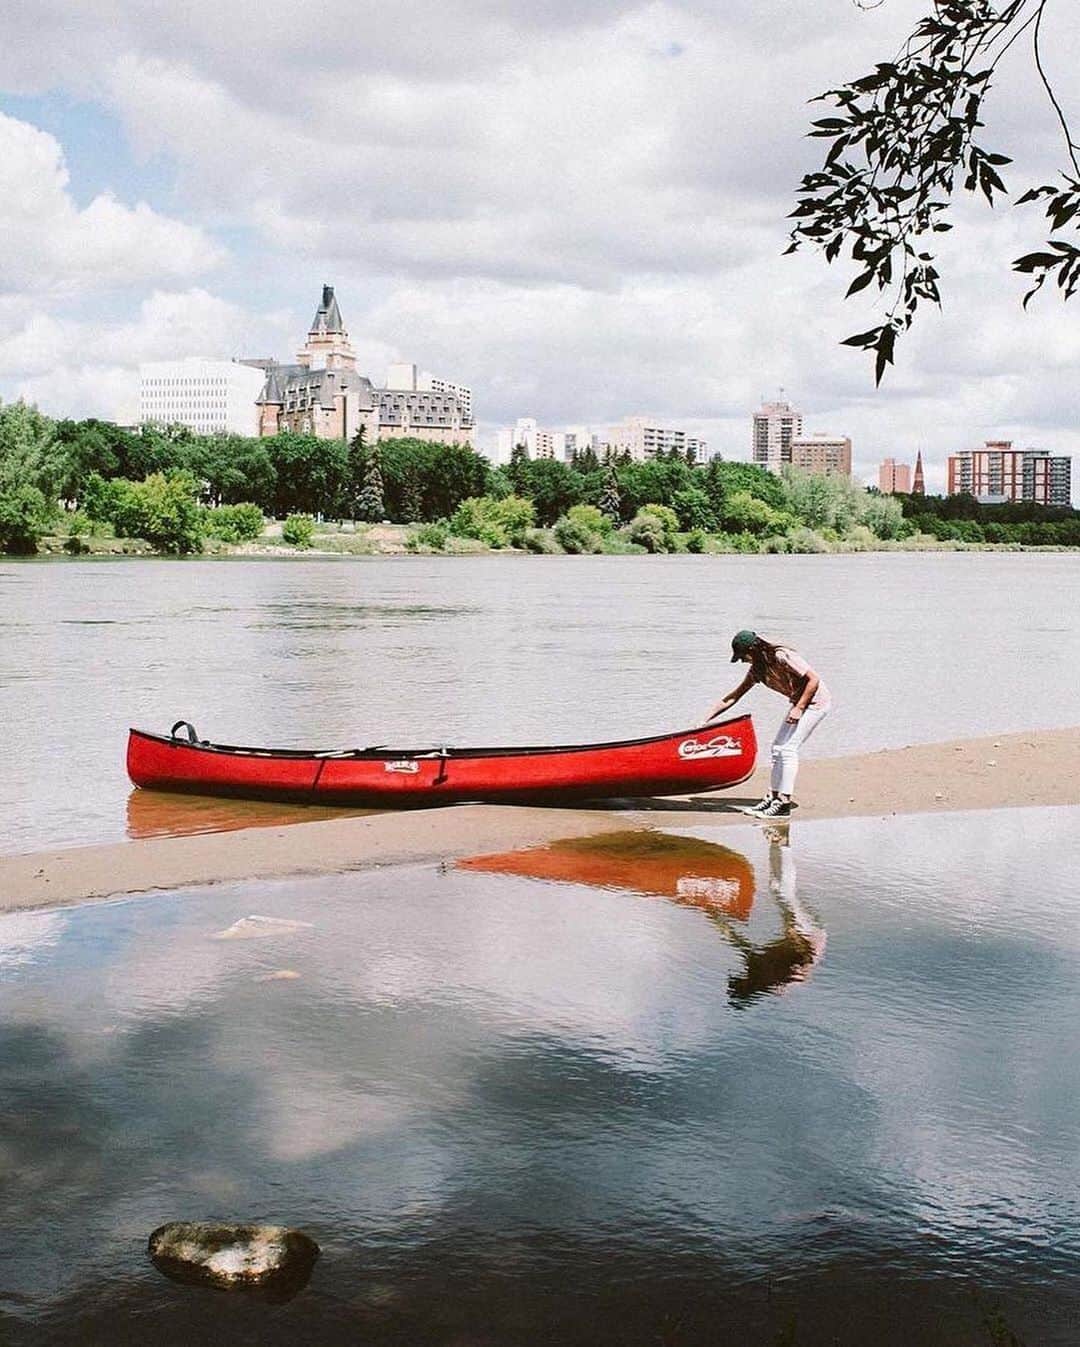 Explore Canadaさんのインスタグラム写真 - (Explore CanadaInstagram)「Today's #CanadaSpotlight is on @visitsaskatoon!⁠⠀⁠⠀ ⁠⠀⁠⠀ The picturesque city of Saskatoon can be found nestled in the Prairie province of Saskatchewan. With the South Saskatchewan River winding through the city and trails surrounding it, Saskatoon is a vibrant, culture-rich city with endless opportunities to explore nature. ⁠⠀⁠⠀ ⁠⠀⁠⠀ Whether you like amazing local food, a strong craft beer scene, museums and art galleries, Indigenous experiences or outdoor adventures, Saskatoon has everything for the perfect city break. ⁠⠀⁠⠀ ⁠⠀⁠⠀ While we might not be able to travel there right now, here are some of our favourite photos of Saskatoon for you to enjoy! If you want to explore more of this city virtually, check out @visitsaskatoon for more pictures, tips and updates.⁠⠀⁠⠀ ⁠⠀⁠⠀ Have you visited Saskatoon in the past? Don't forget to tag #ExploreCanadaFromHome in any memories you share!⁠⠀⁠⠀ ⁠⠀⁠⠀ ⁠⠀⁠⠀ #ExploreCanadaFromHome #ForGlowingHearts ⁠⠀⁠⠀ ⁠⠀⁠⠀ 📷 ⁠⠀⁠⠀ 1. @visitsaskatoon⁠⠀⁠⠀ 2. @mckda4⁠⠀⁠⠀ 3. @joordanrenee⁠⠀⁠⠀ 4. @visitsaskatoon⁠⠀⁠⠀ 5. @himadry⁠⠀⁠⠀ 6. @heyitslorenzo⁠⠀⁠⠀ 7. @bennnnnnnngie⁠⠀⁠⠀ 8. @visitsaskatoon & Carey Shaw ⁠⠀⁠⠀ ⁠⠀⁠⠀ 📍 @visitsaskatoon⁠⠀⁠⠀ ⁠⠀⁠⠀ #Saskatooning」5月30日 3時33分 - explorecanada